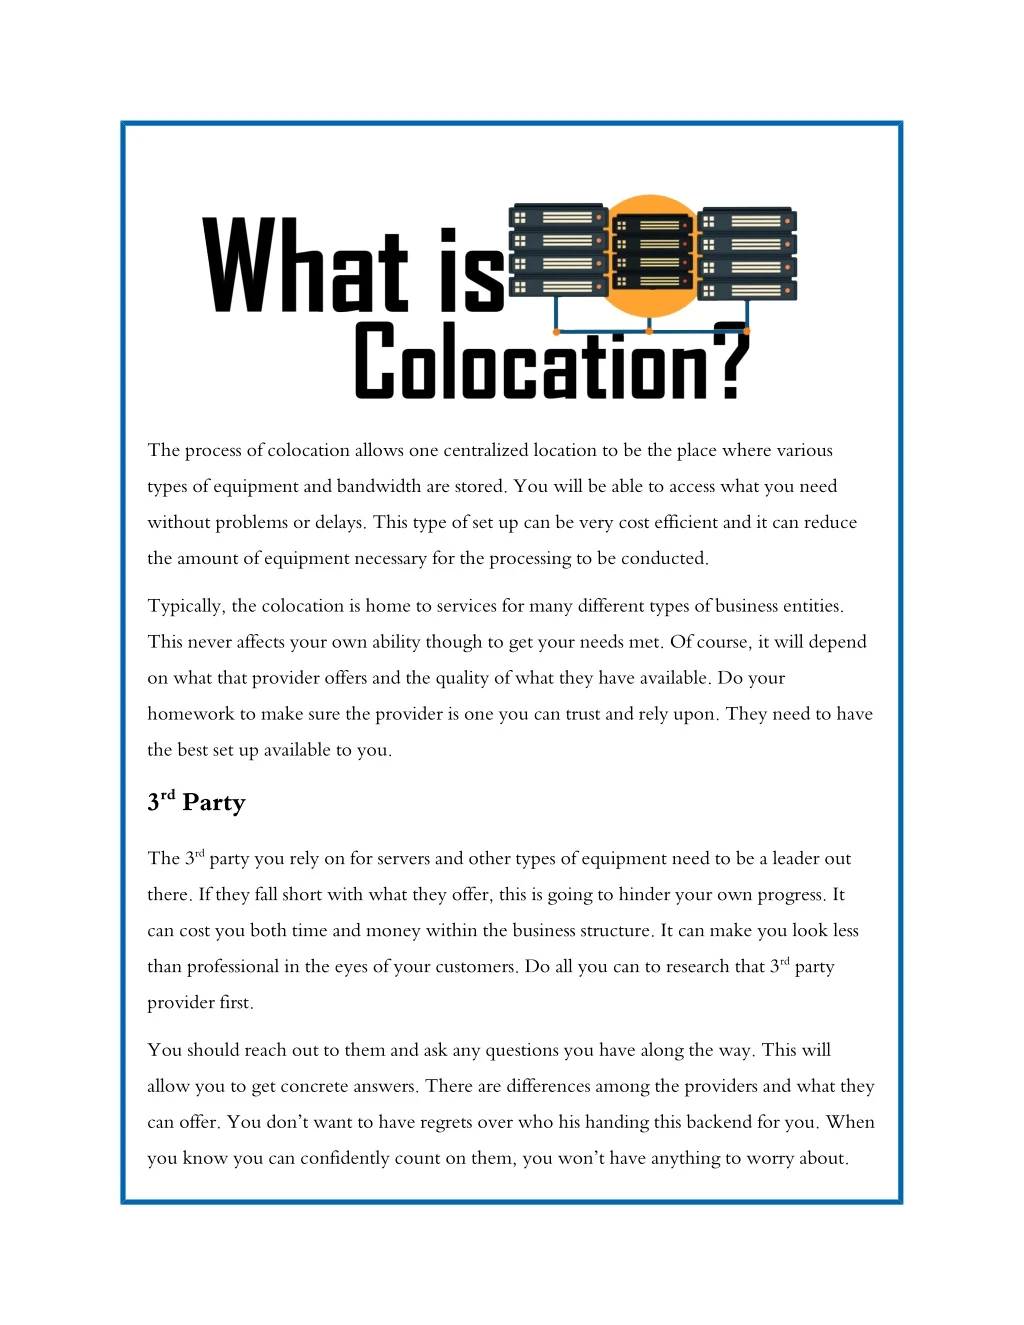 the process of colocation allows one centralized